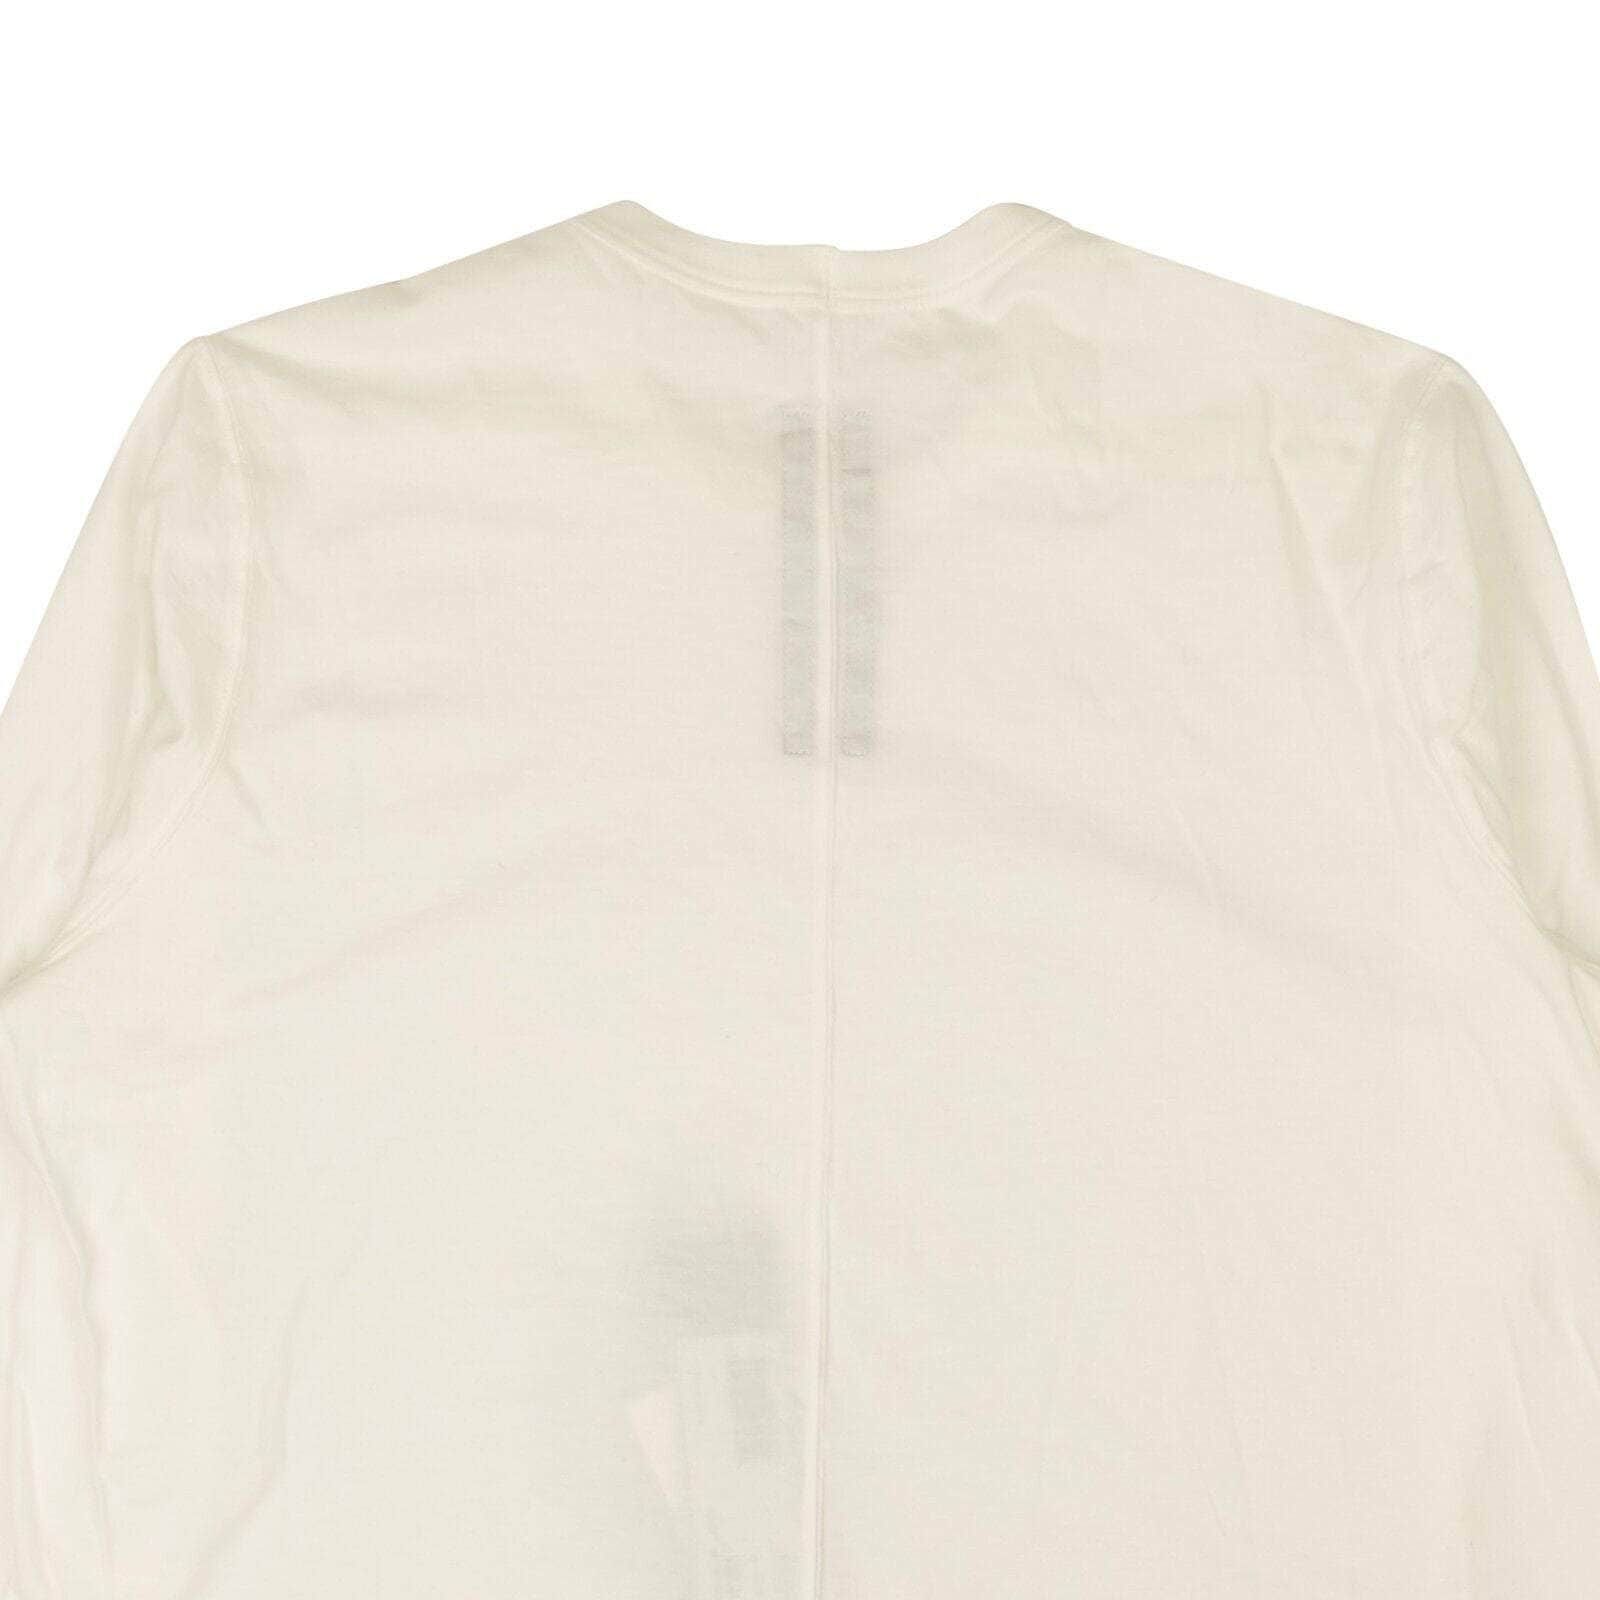 Rick Owens 250-500, channelenable-all, chicmi, couponcollection, gender-mens, main-clothing, mens-shoes, rick-owens, size-m M Milk White Level Cotton Long Sleeve T-Shirt ROW-XTSH-0028/M ROW-XTSH-0028/M